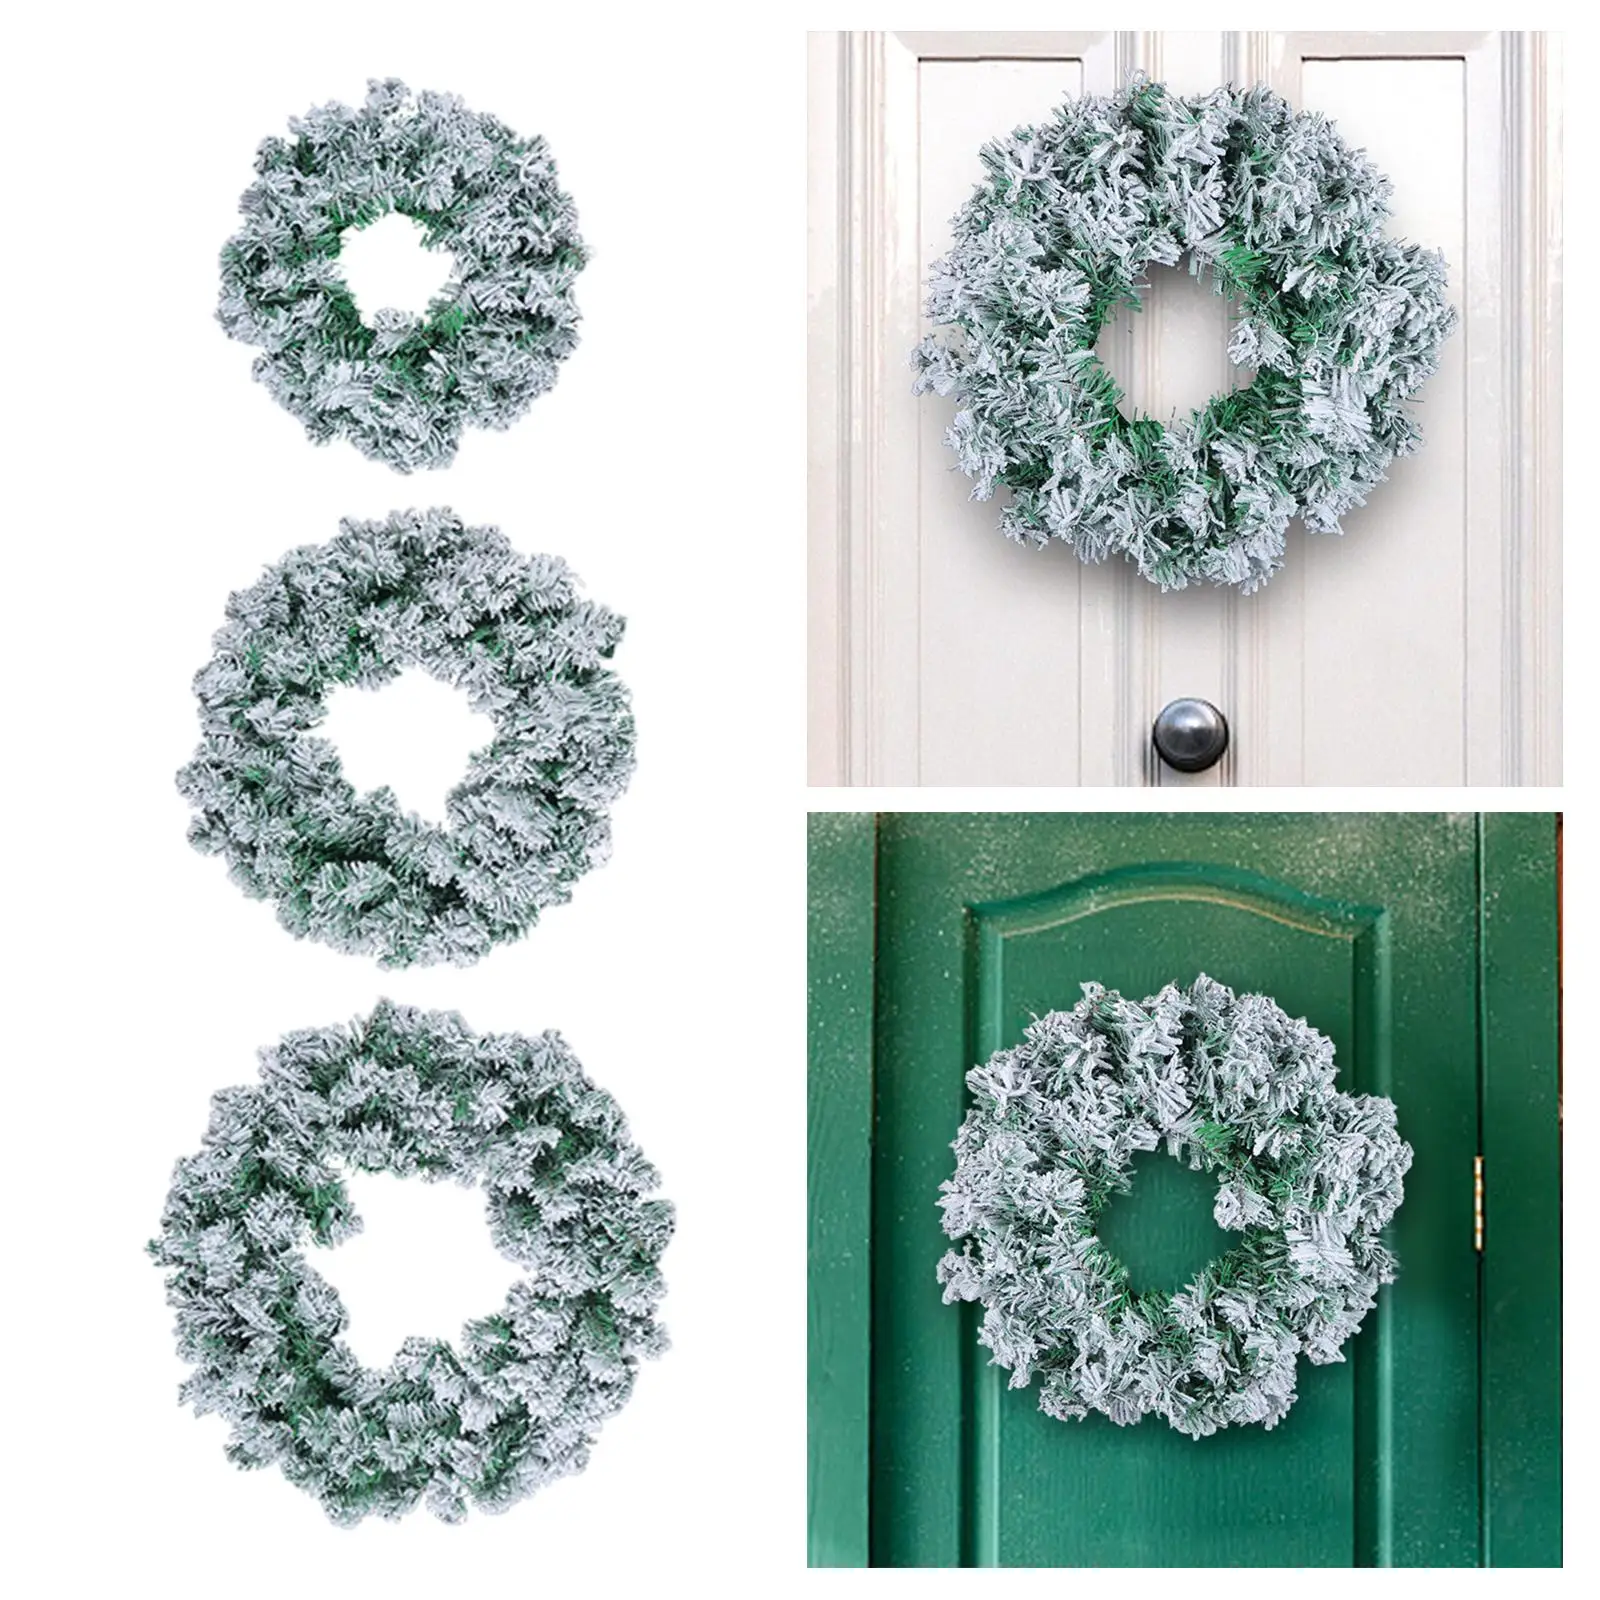 Artificial Snowy Christmas Wreath Decorative Xmas Decor Hanging Ornament Front Door Wreath for Wall Home Party Window House